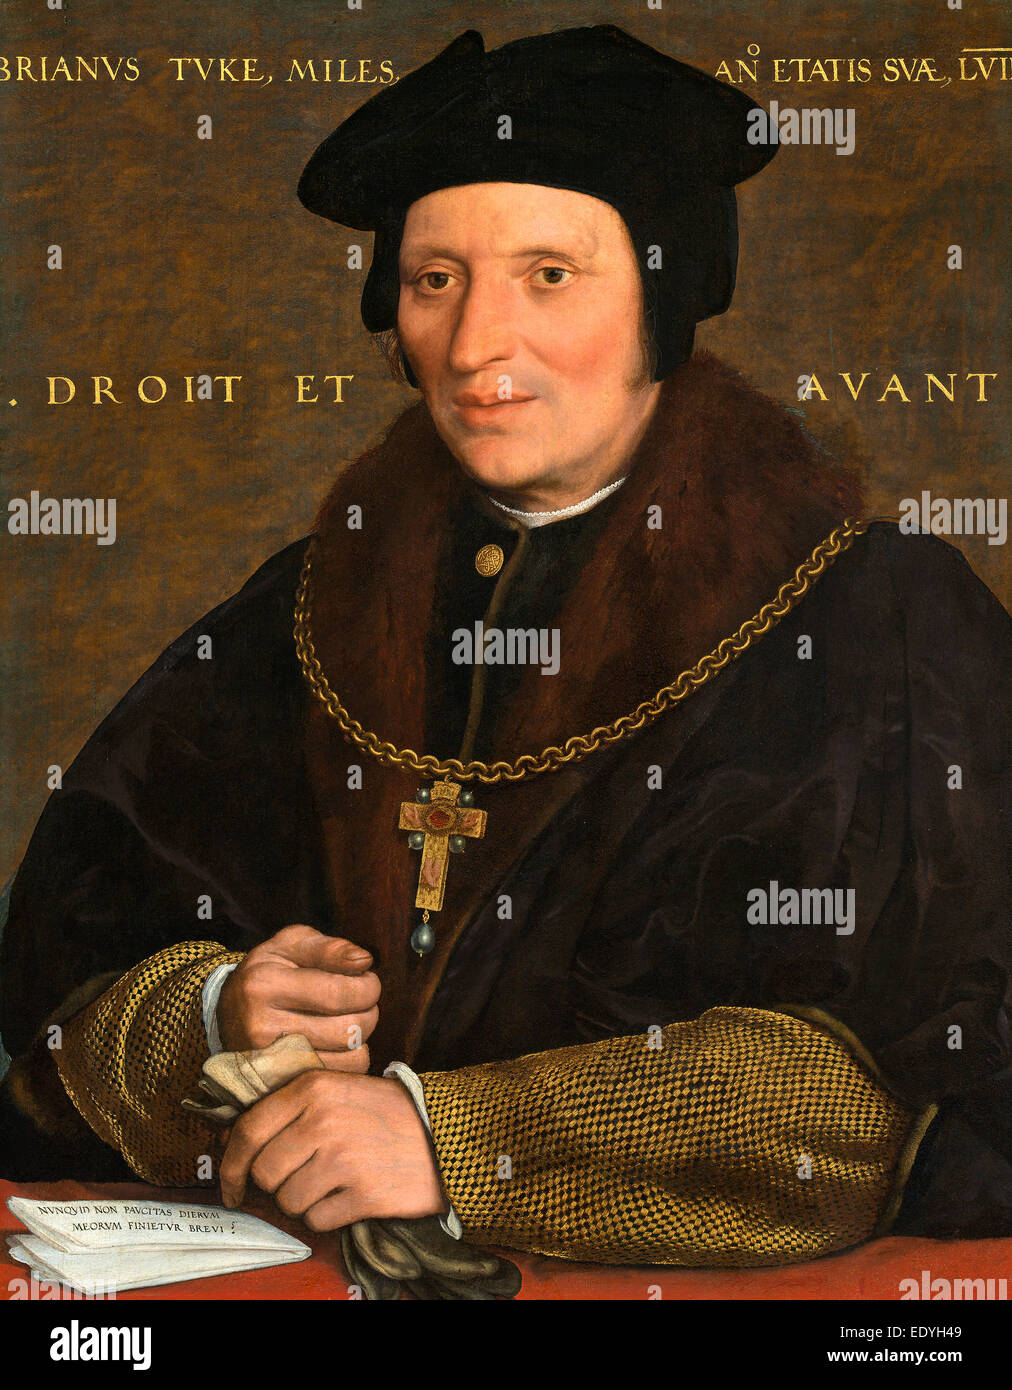 Hans Holbein the Younger (German, 1497-1498 - 1543), Sir Brian Tuke, c. 1527-1528 or c. 1532-1534, oil on panel Stock Photo